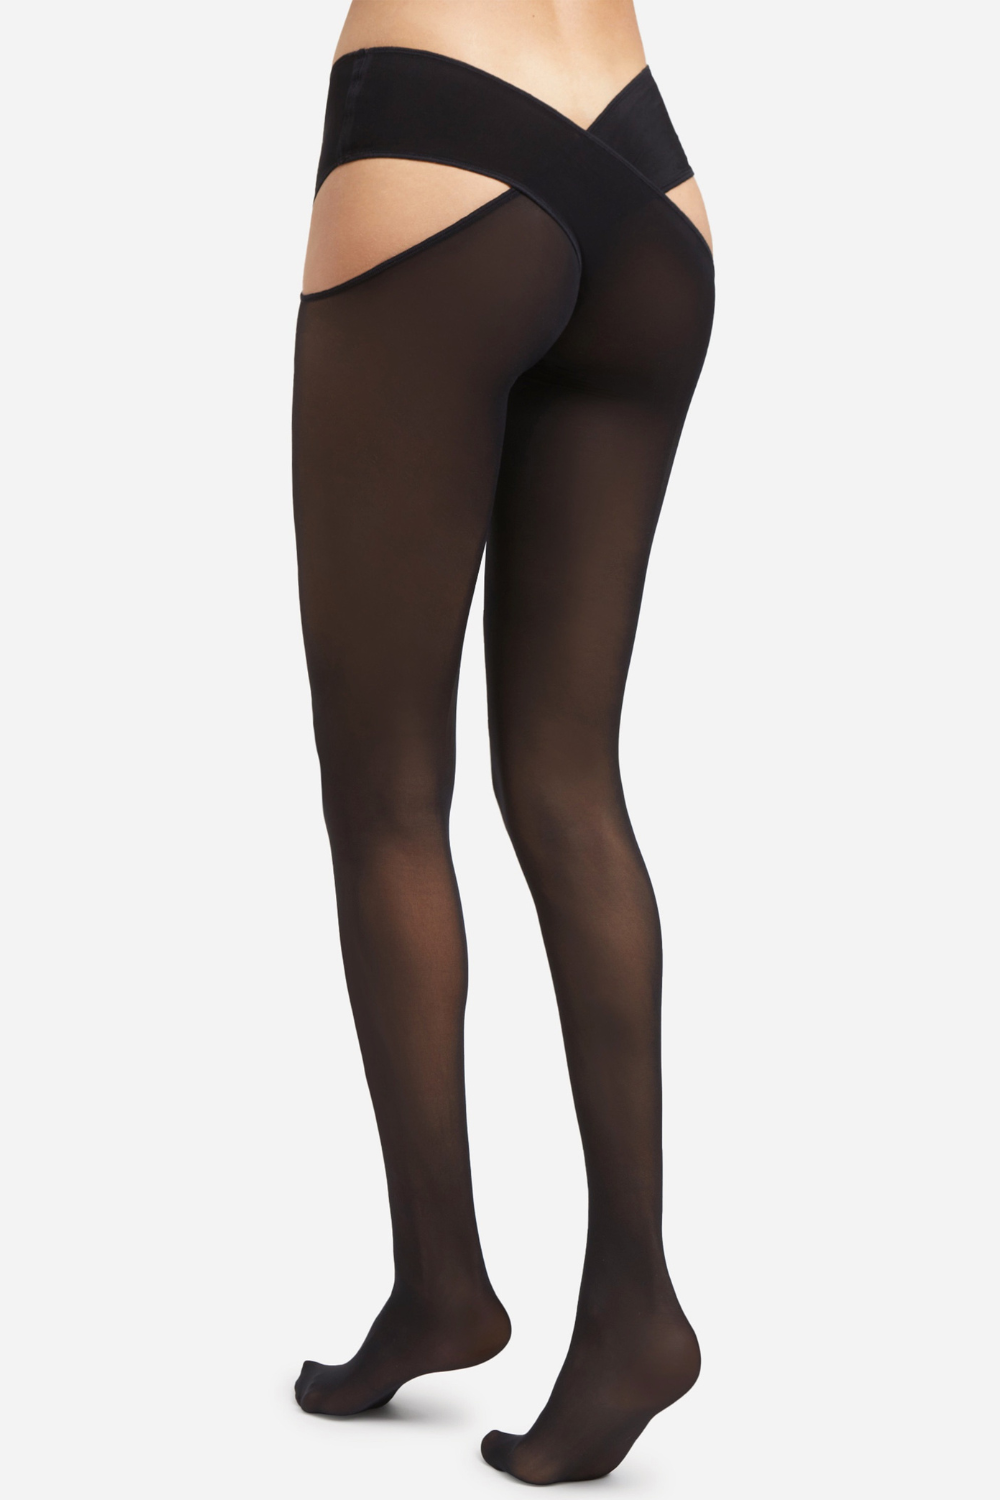 Wolford Stay-Hip Individual 12 Tights